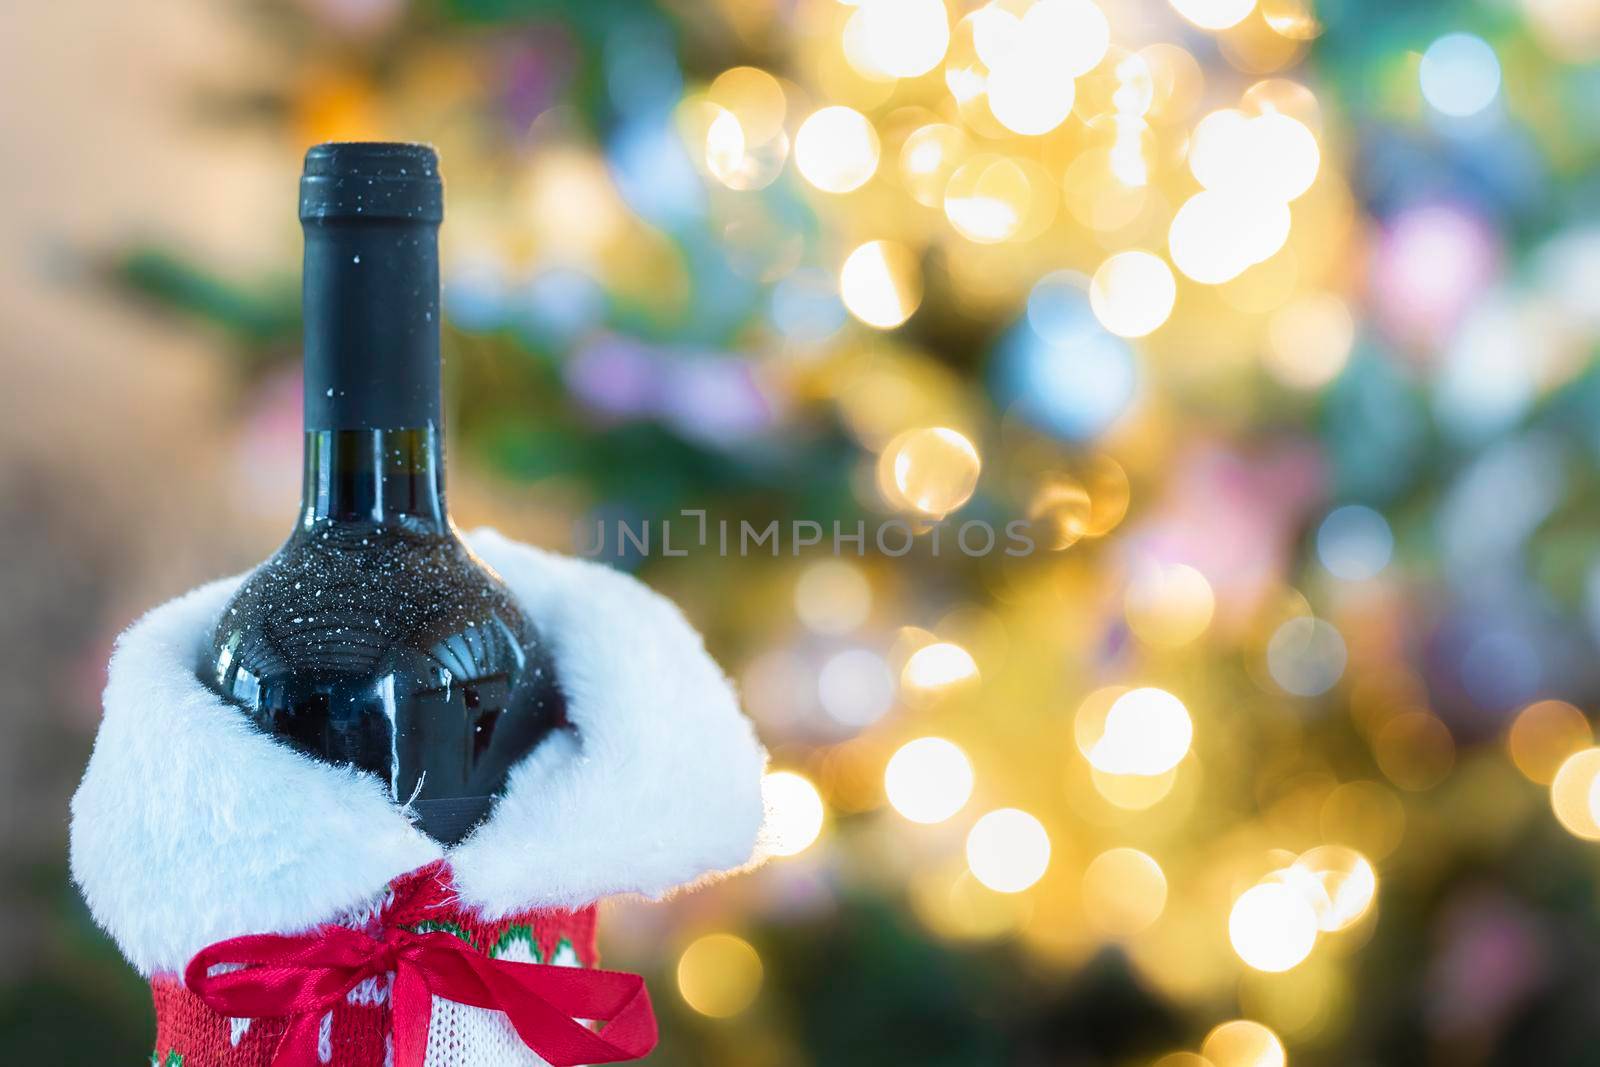 Luxurious holiday composition, a bottle wine with a Christmas tree and bokeh lights on the background with copy space, Holiday concept by Annebel146